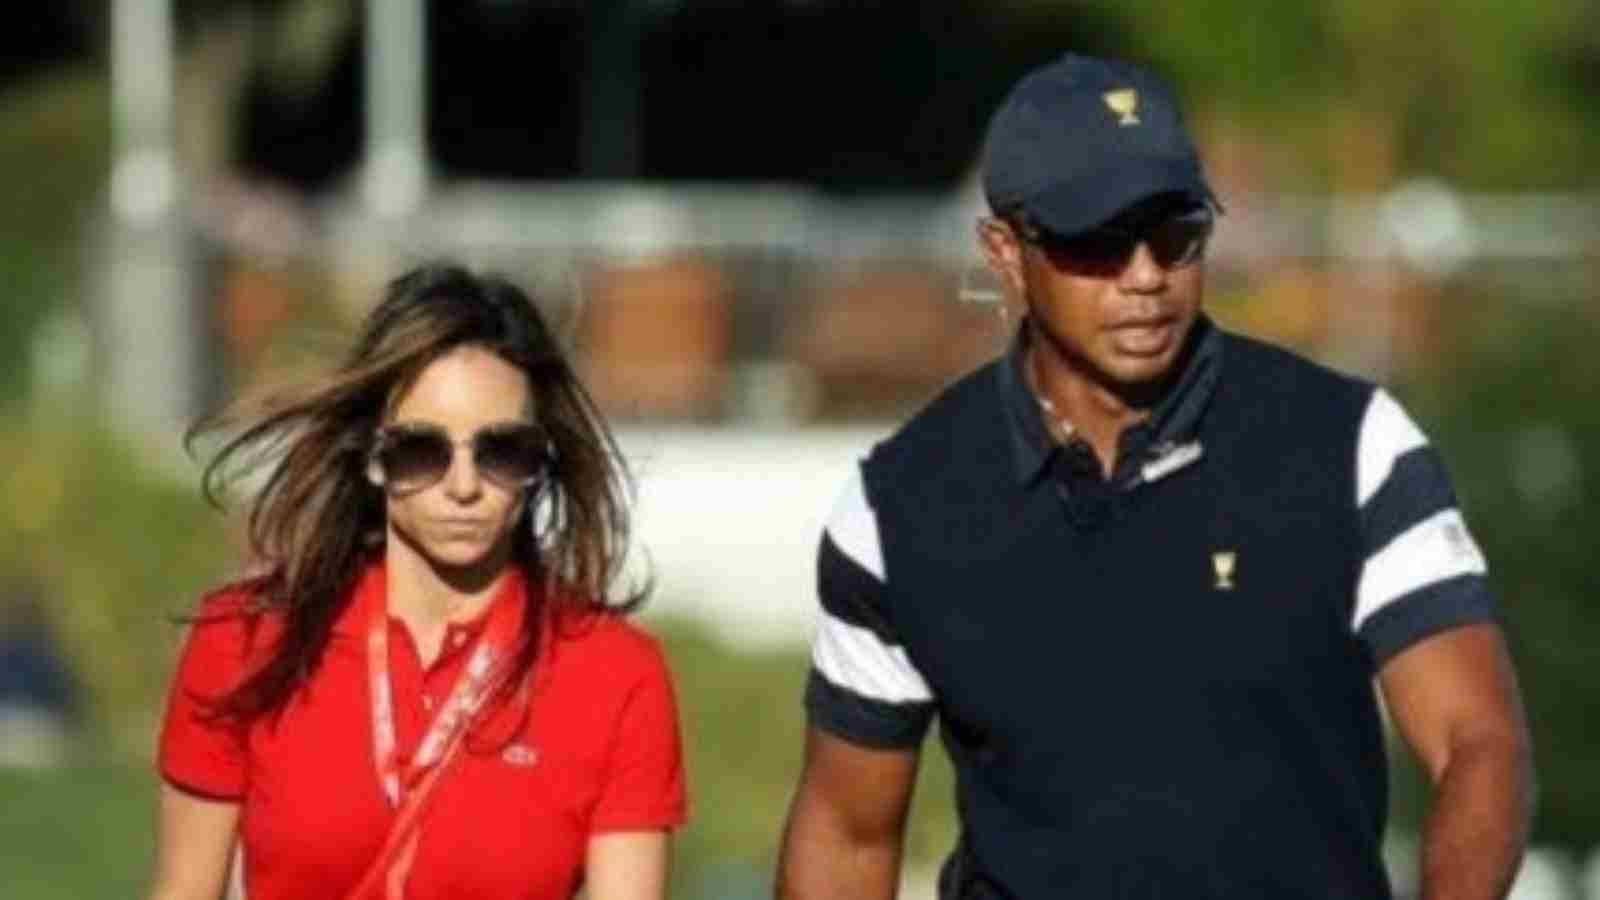 Tiger Woods Girlfriend: Erica Herman Ethnicity, Parents and More!